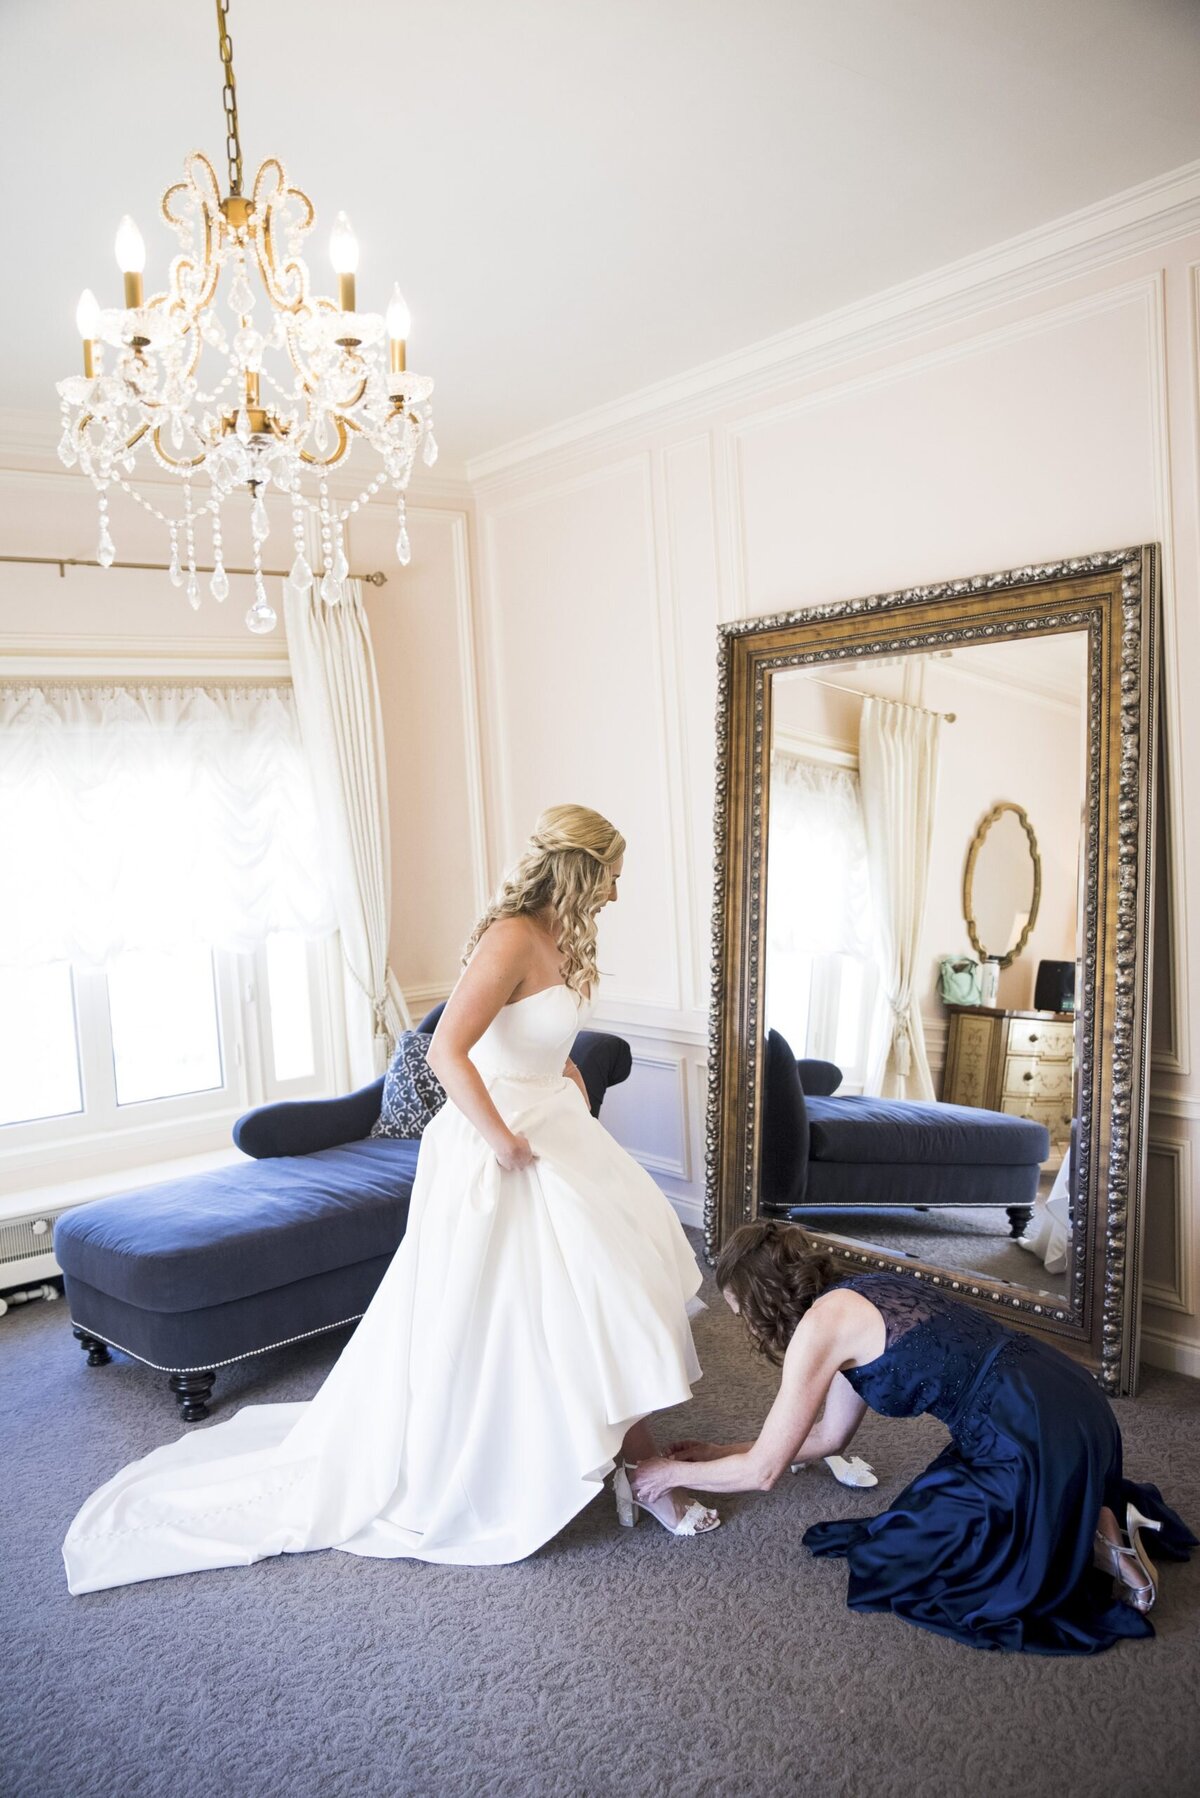 A bride looks in an ornate mirror as one of her bridesmaids helps her fasten her shoe.